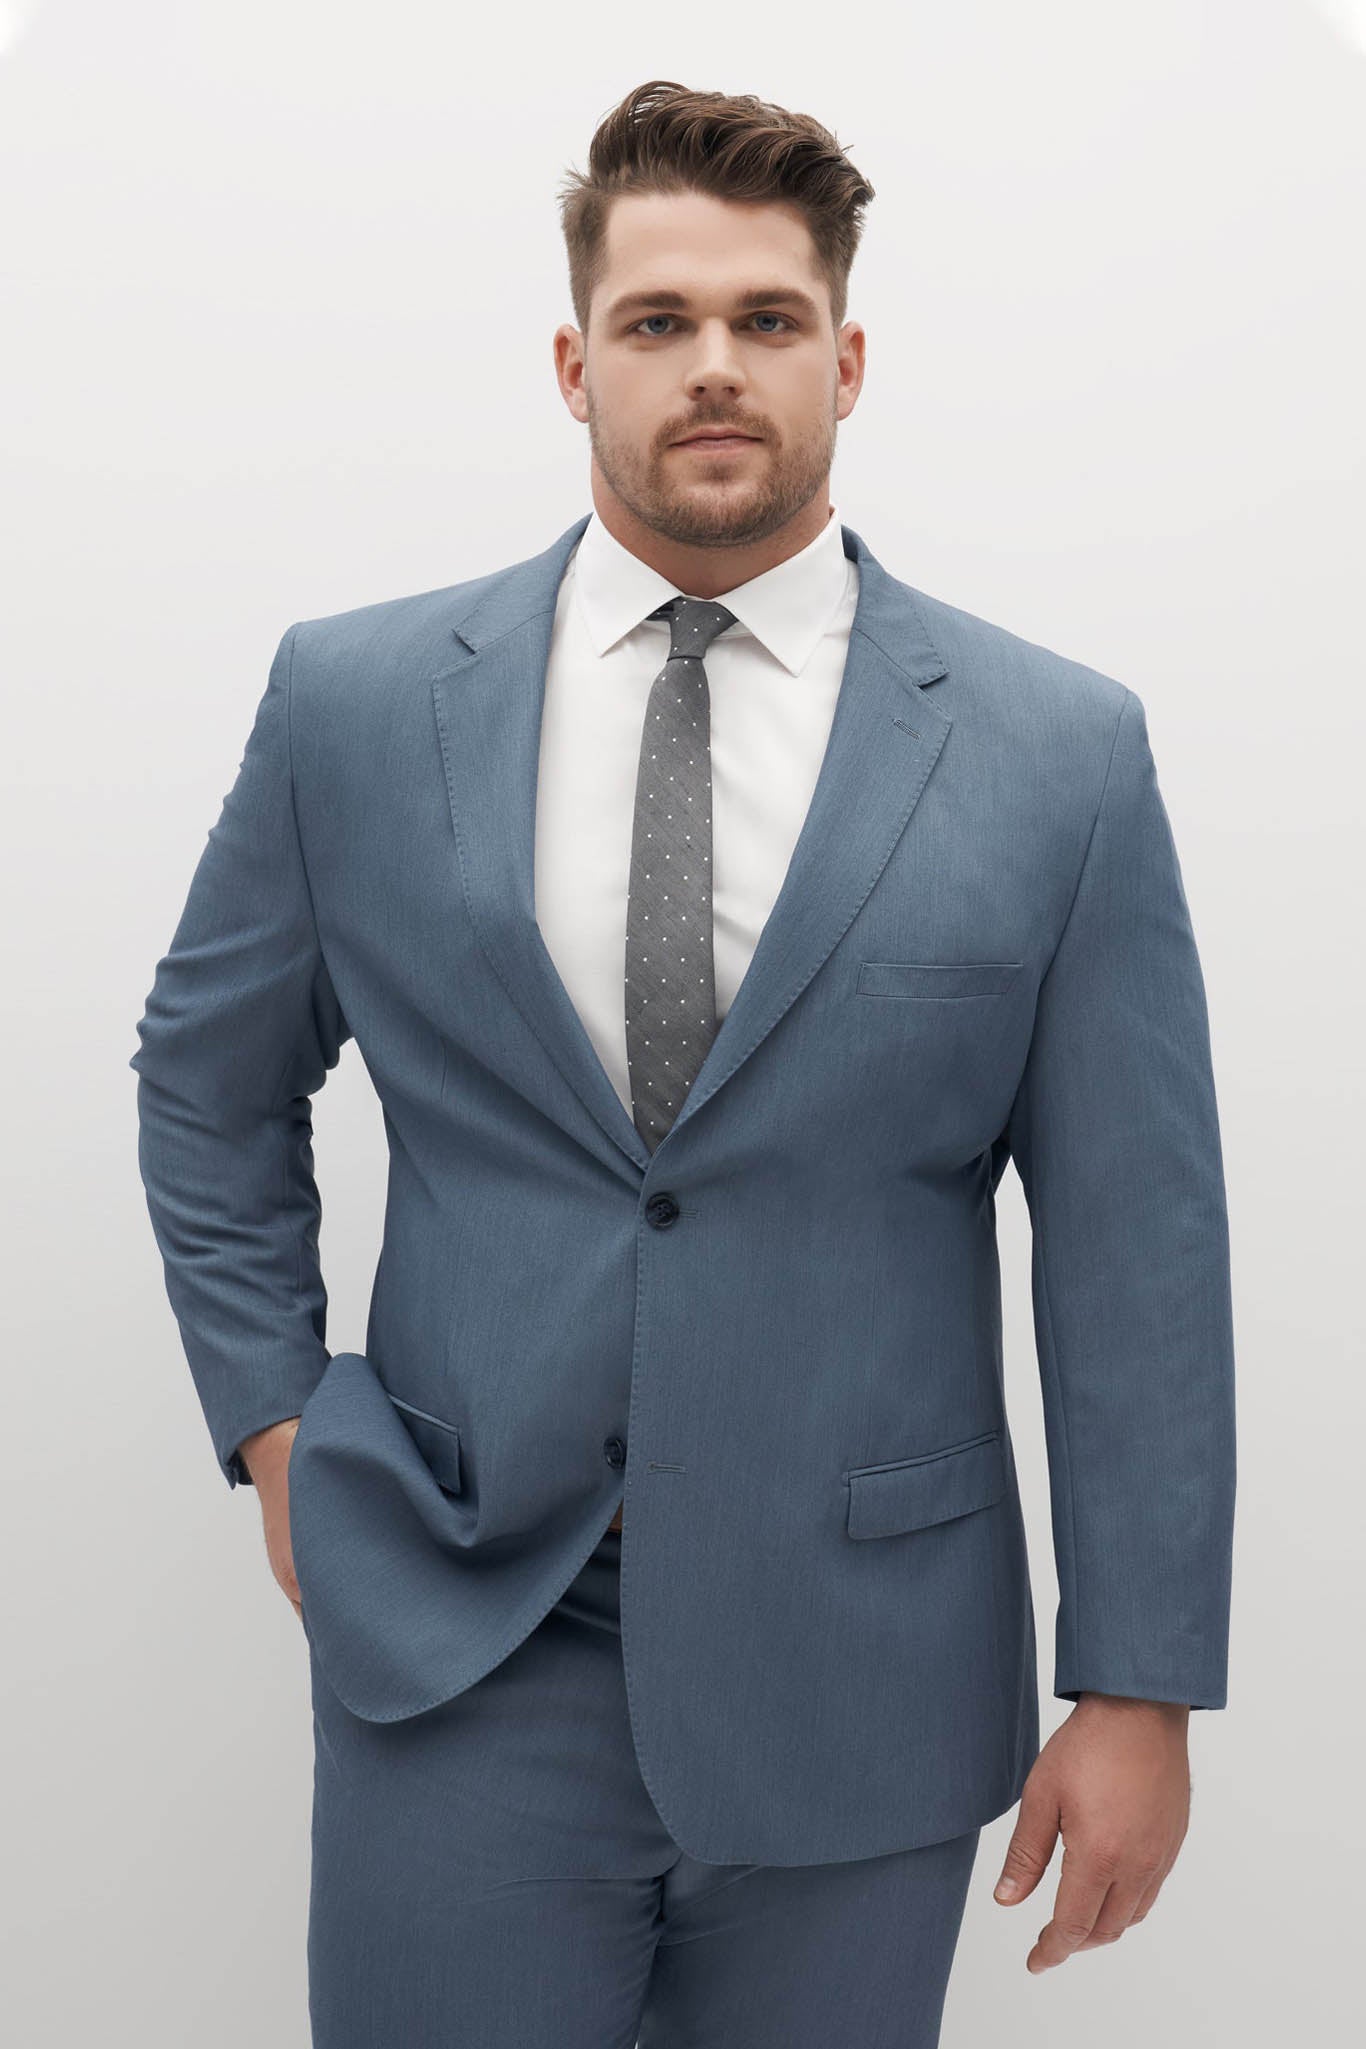 Charcoal Gray Suit Jacket by SuitShop